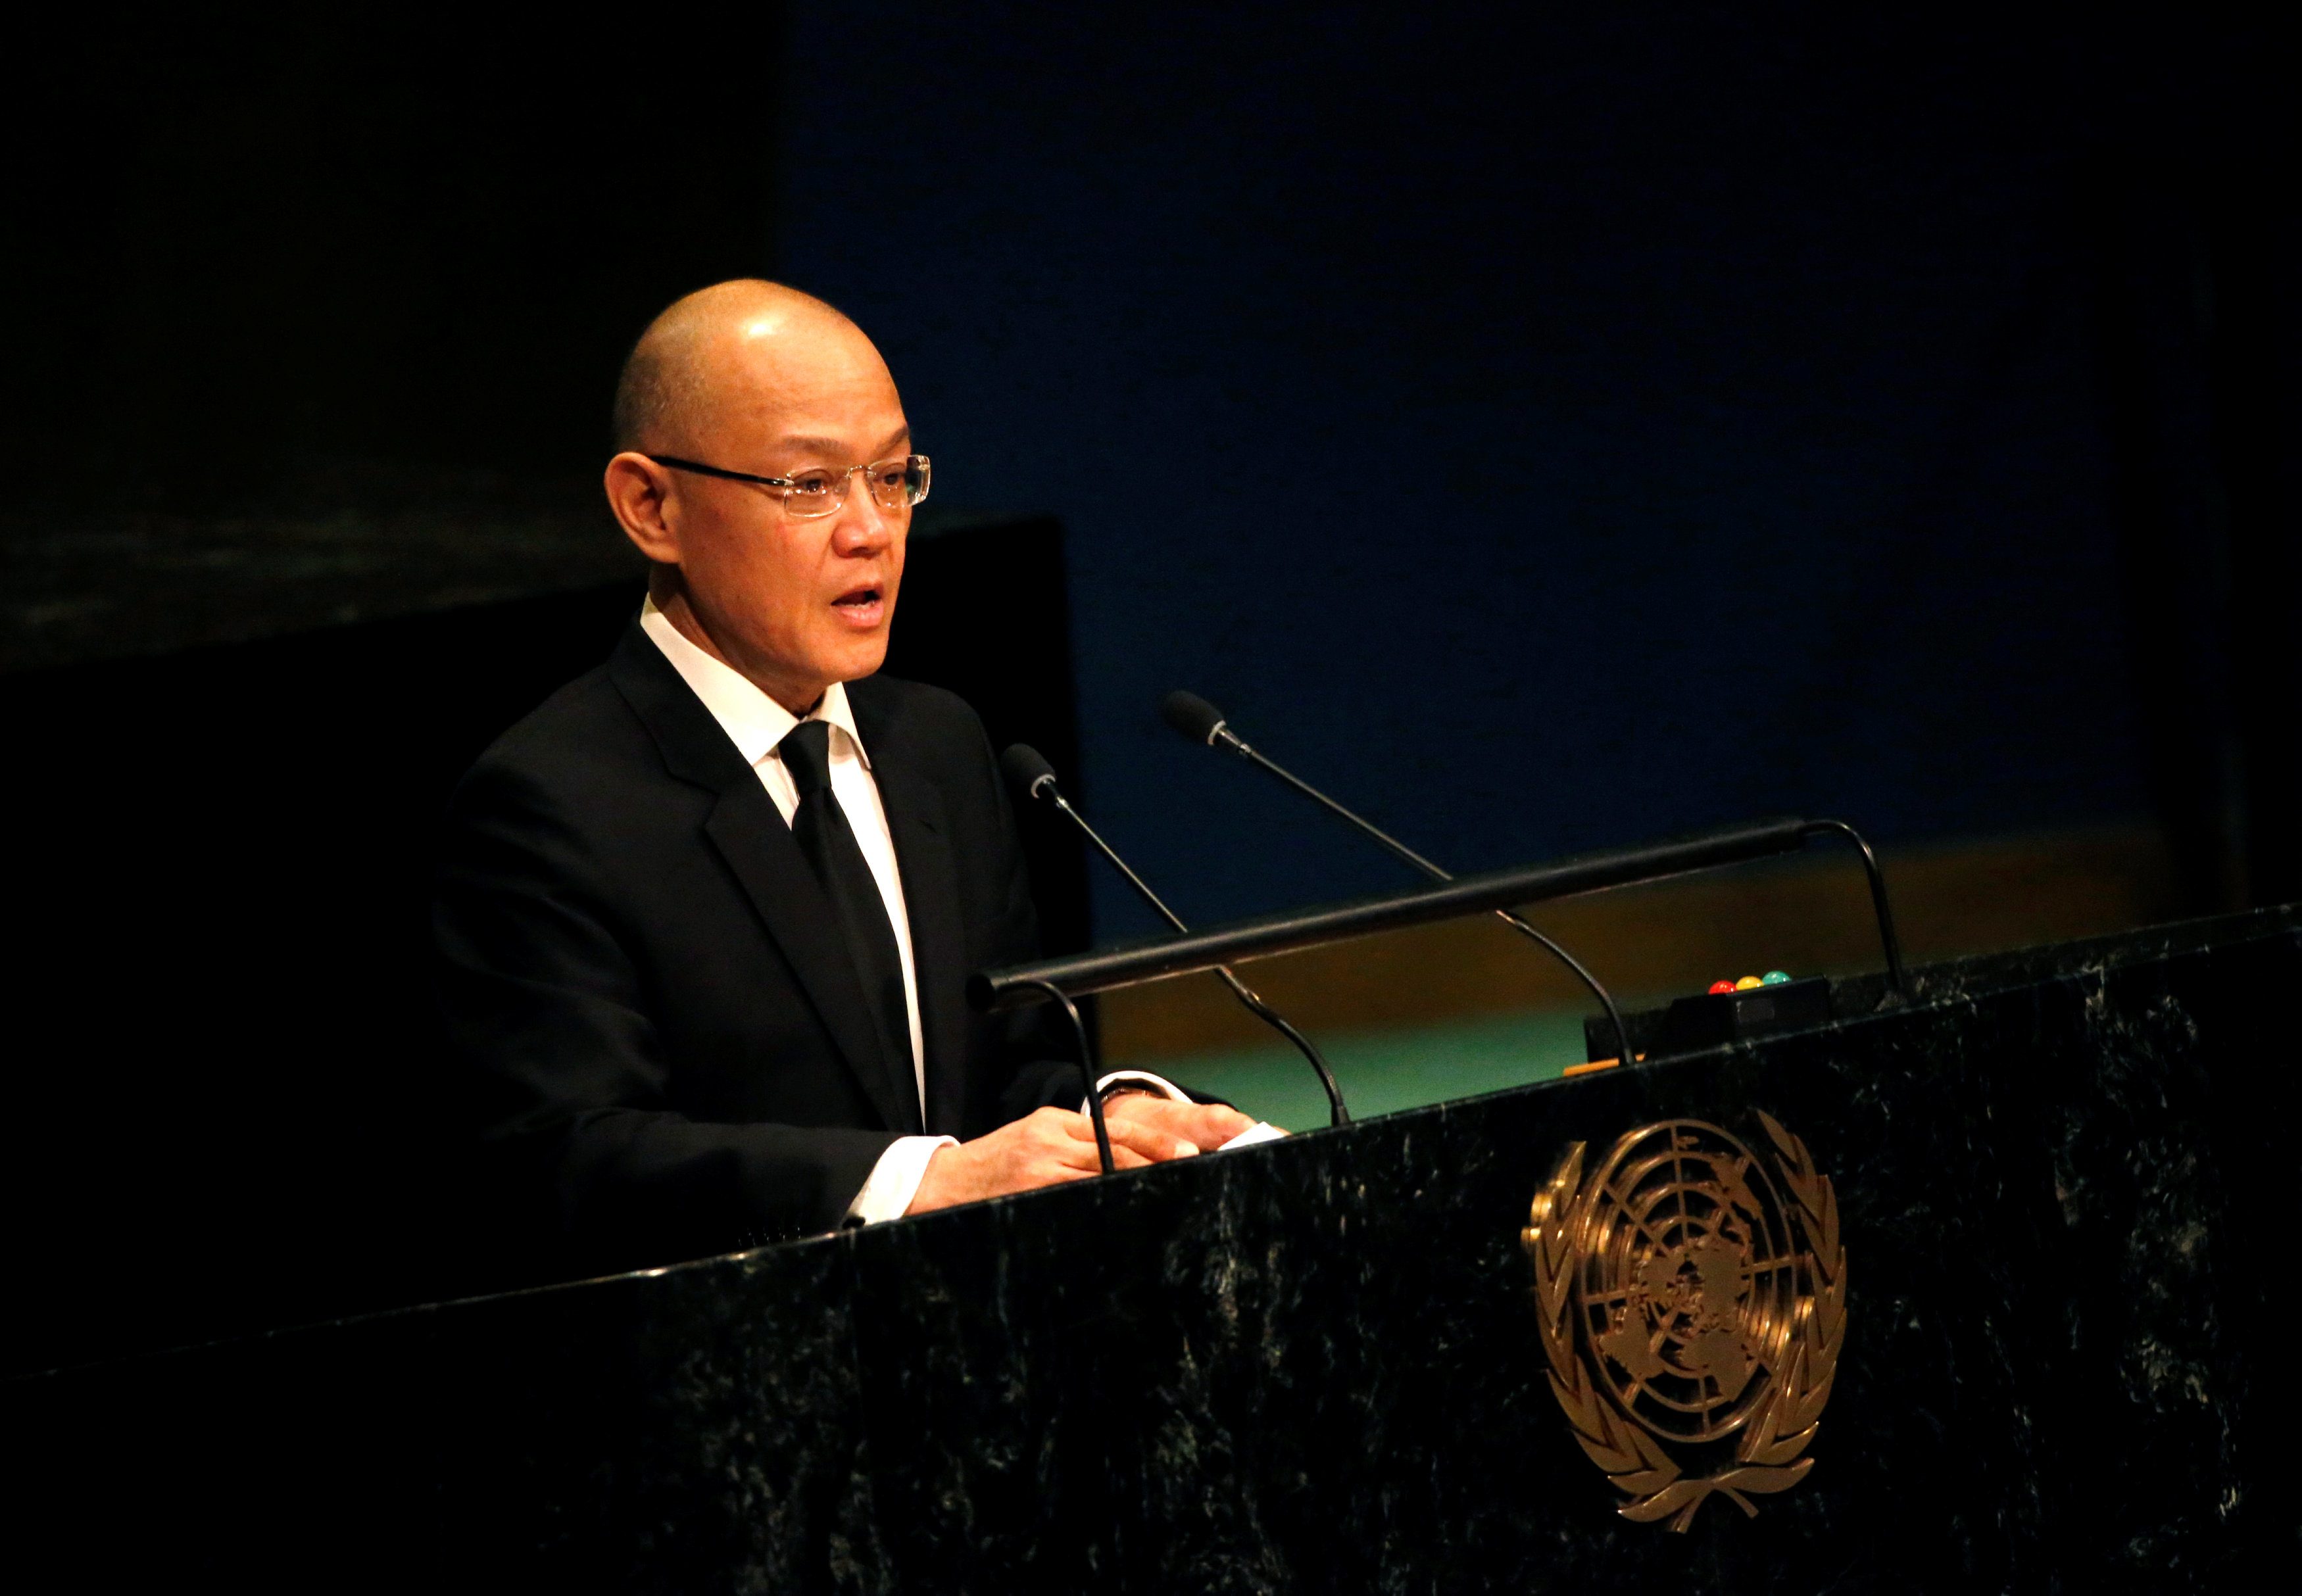 Thailand's Ambassador to the United Nations Virachai Plasai speaks during a tribute to the late King of Thailand Bhumibol Adulyadej in the General Assembly at United Nations headquarters in New York, October 28, 2016. REUTERS/Brendan McDermid